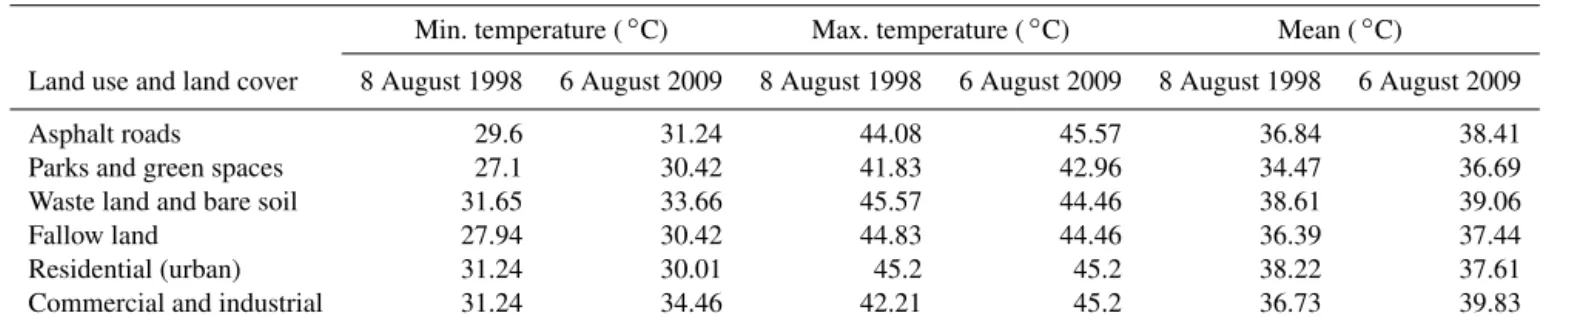 Table 7. Land surface temperature of different land use categories of Yazd city.